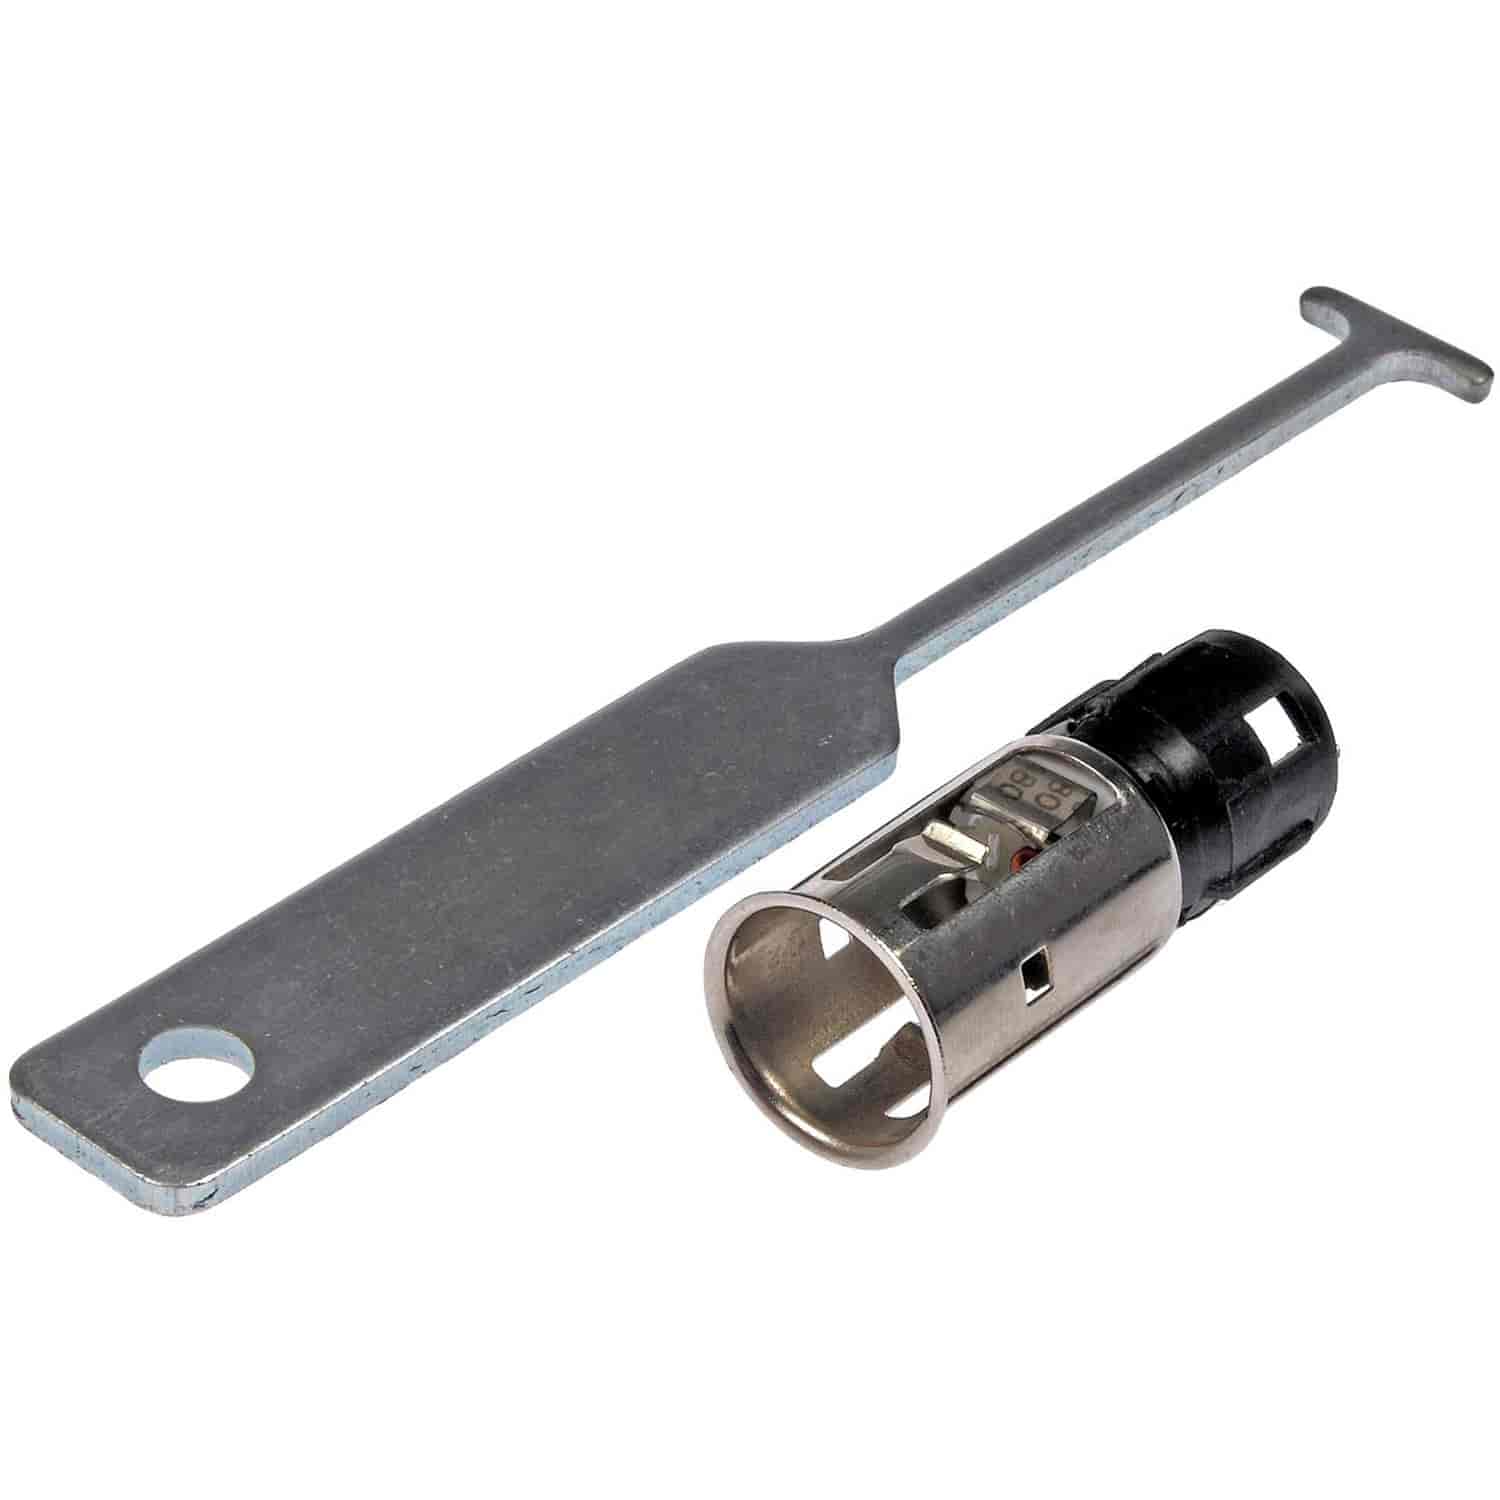 Lighter Socket and Removal Tool for 1997-2019 GM Vehicles